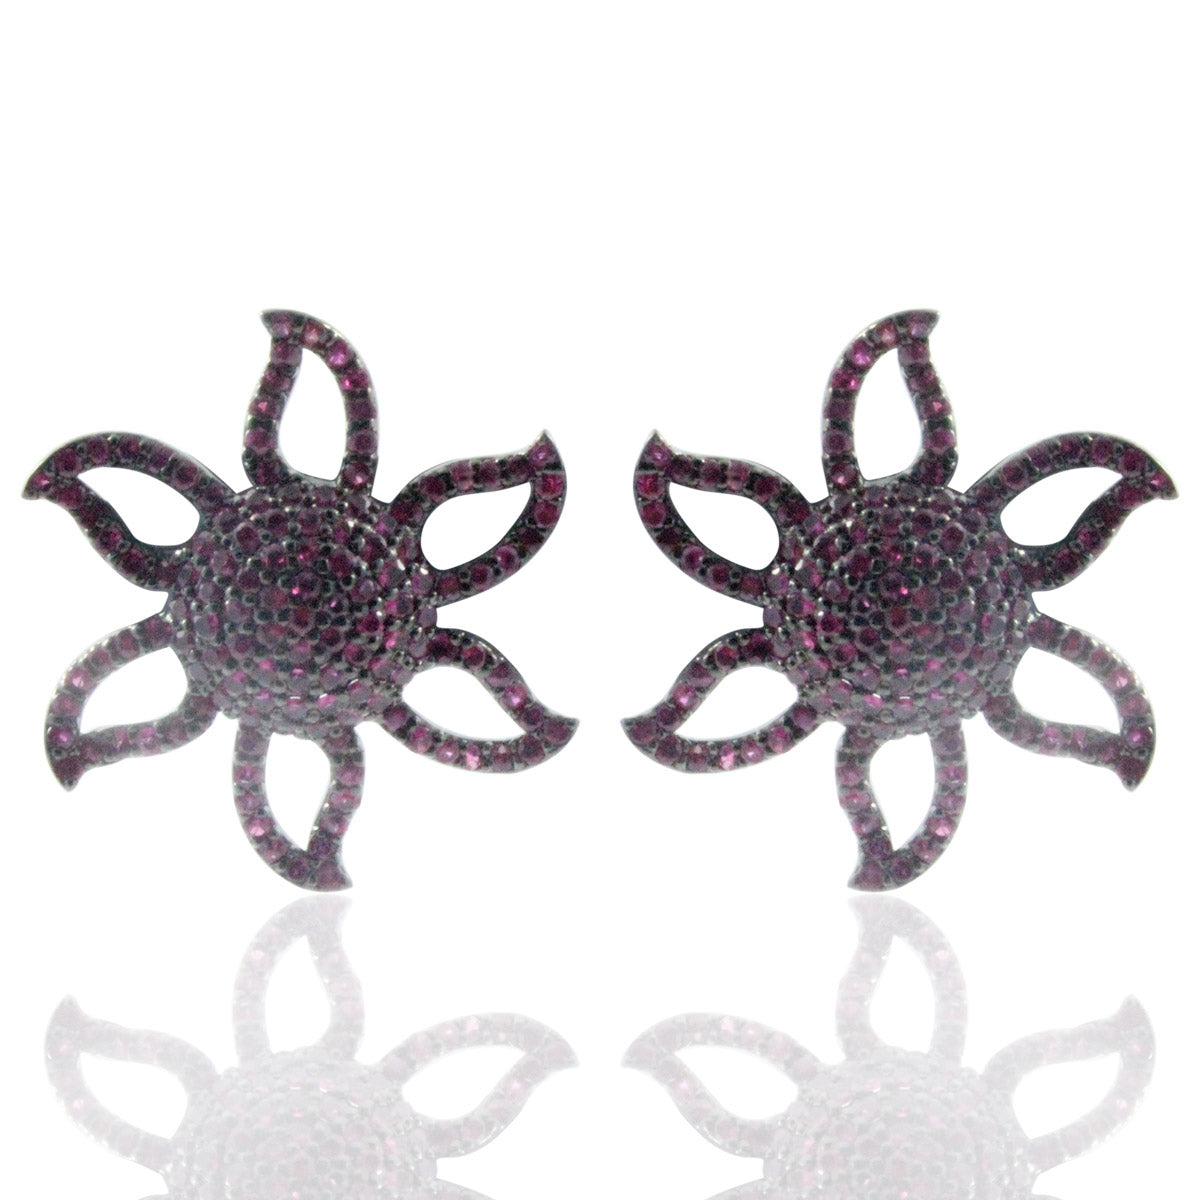 Flower pave Diamond and Silver Earrings